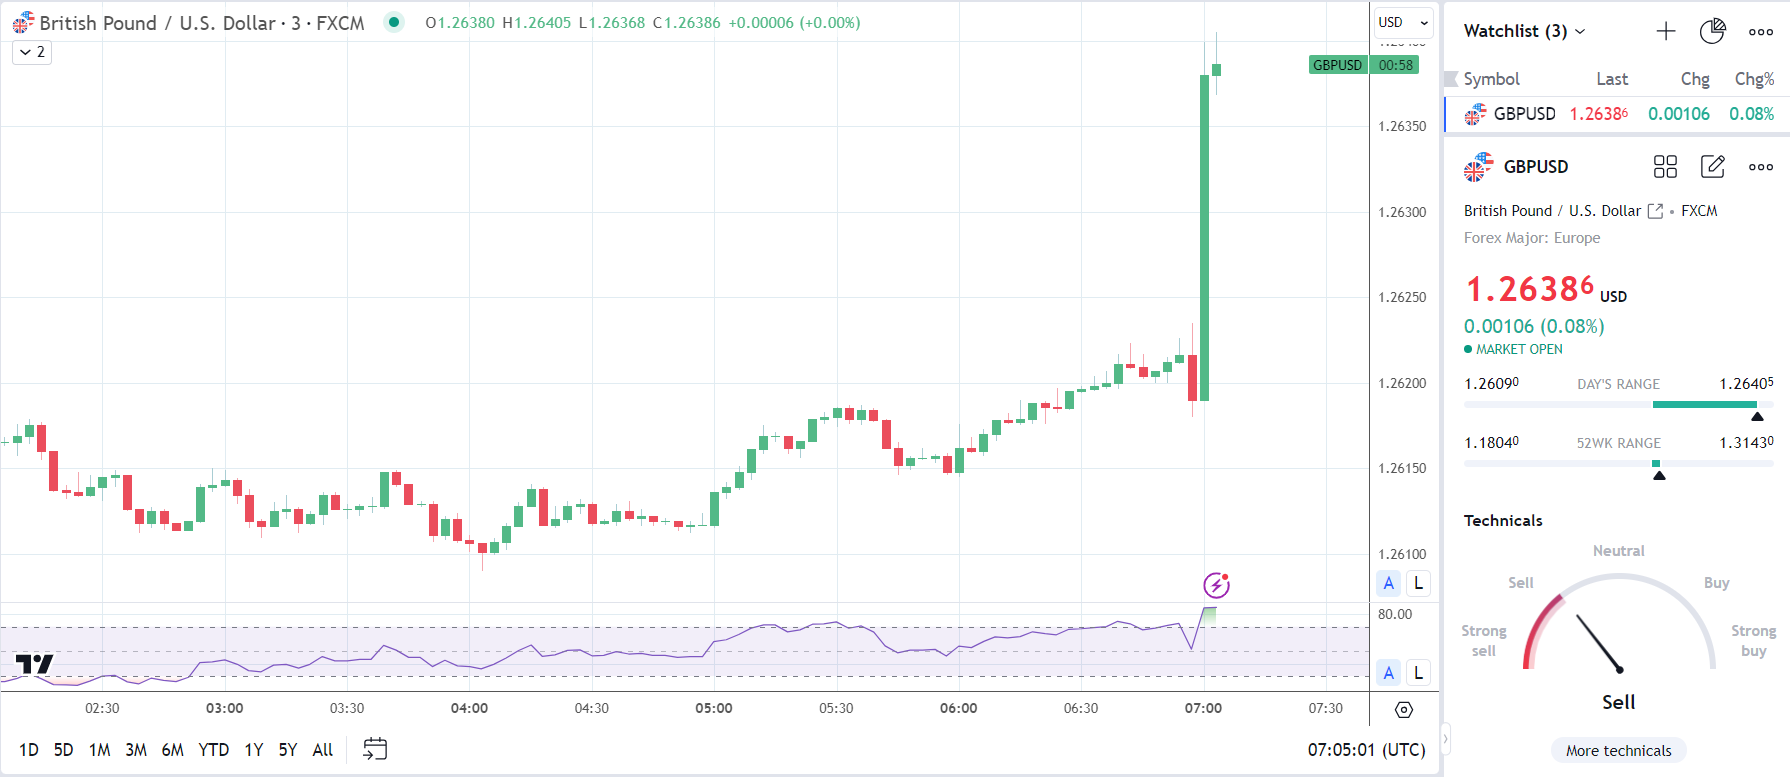 GBP/USD reacts to UK unemployment rate fall.